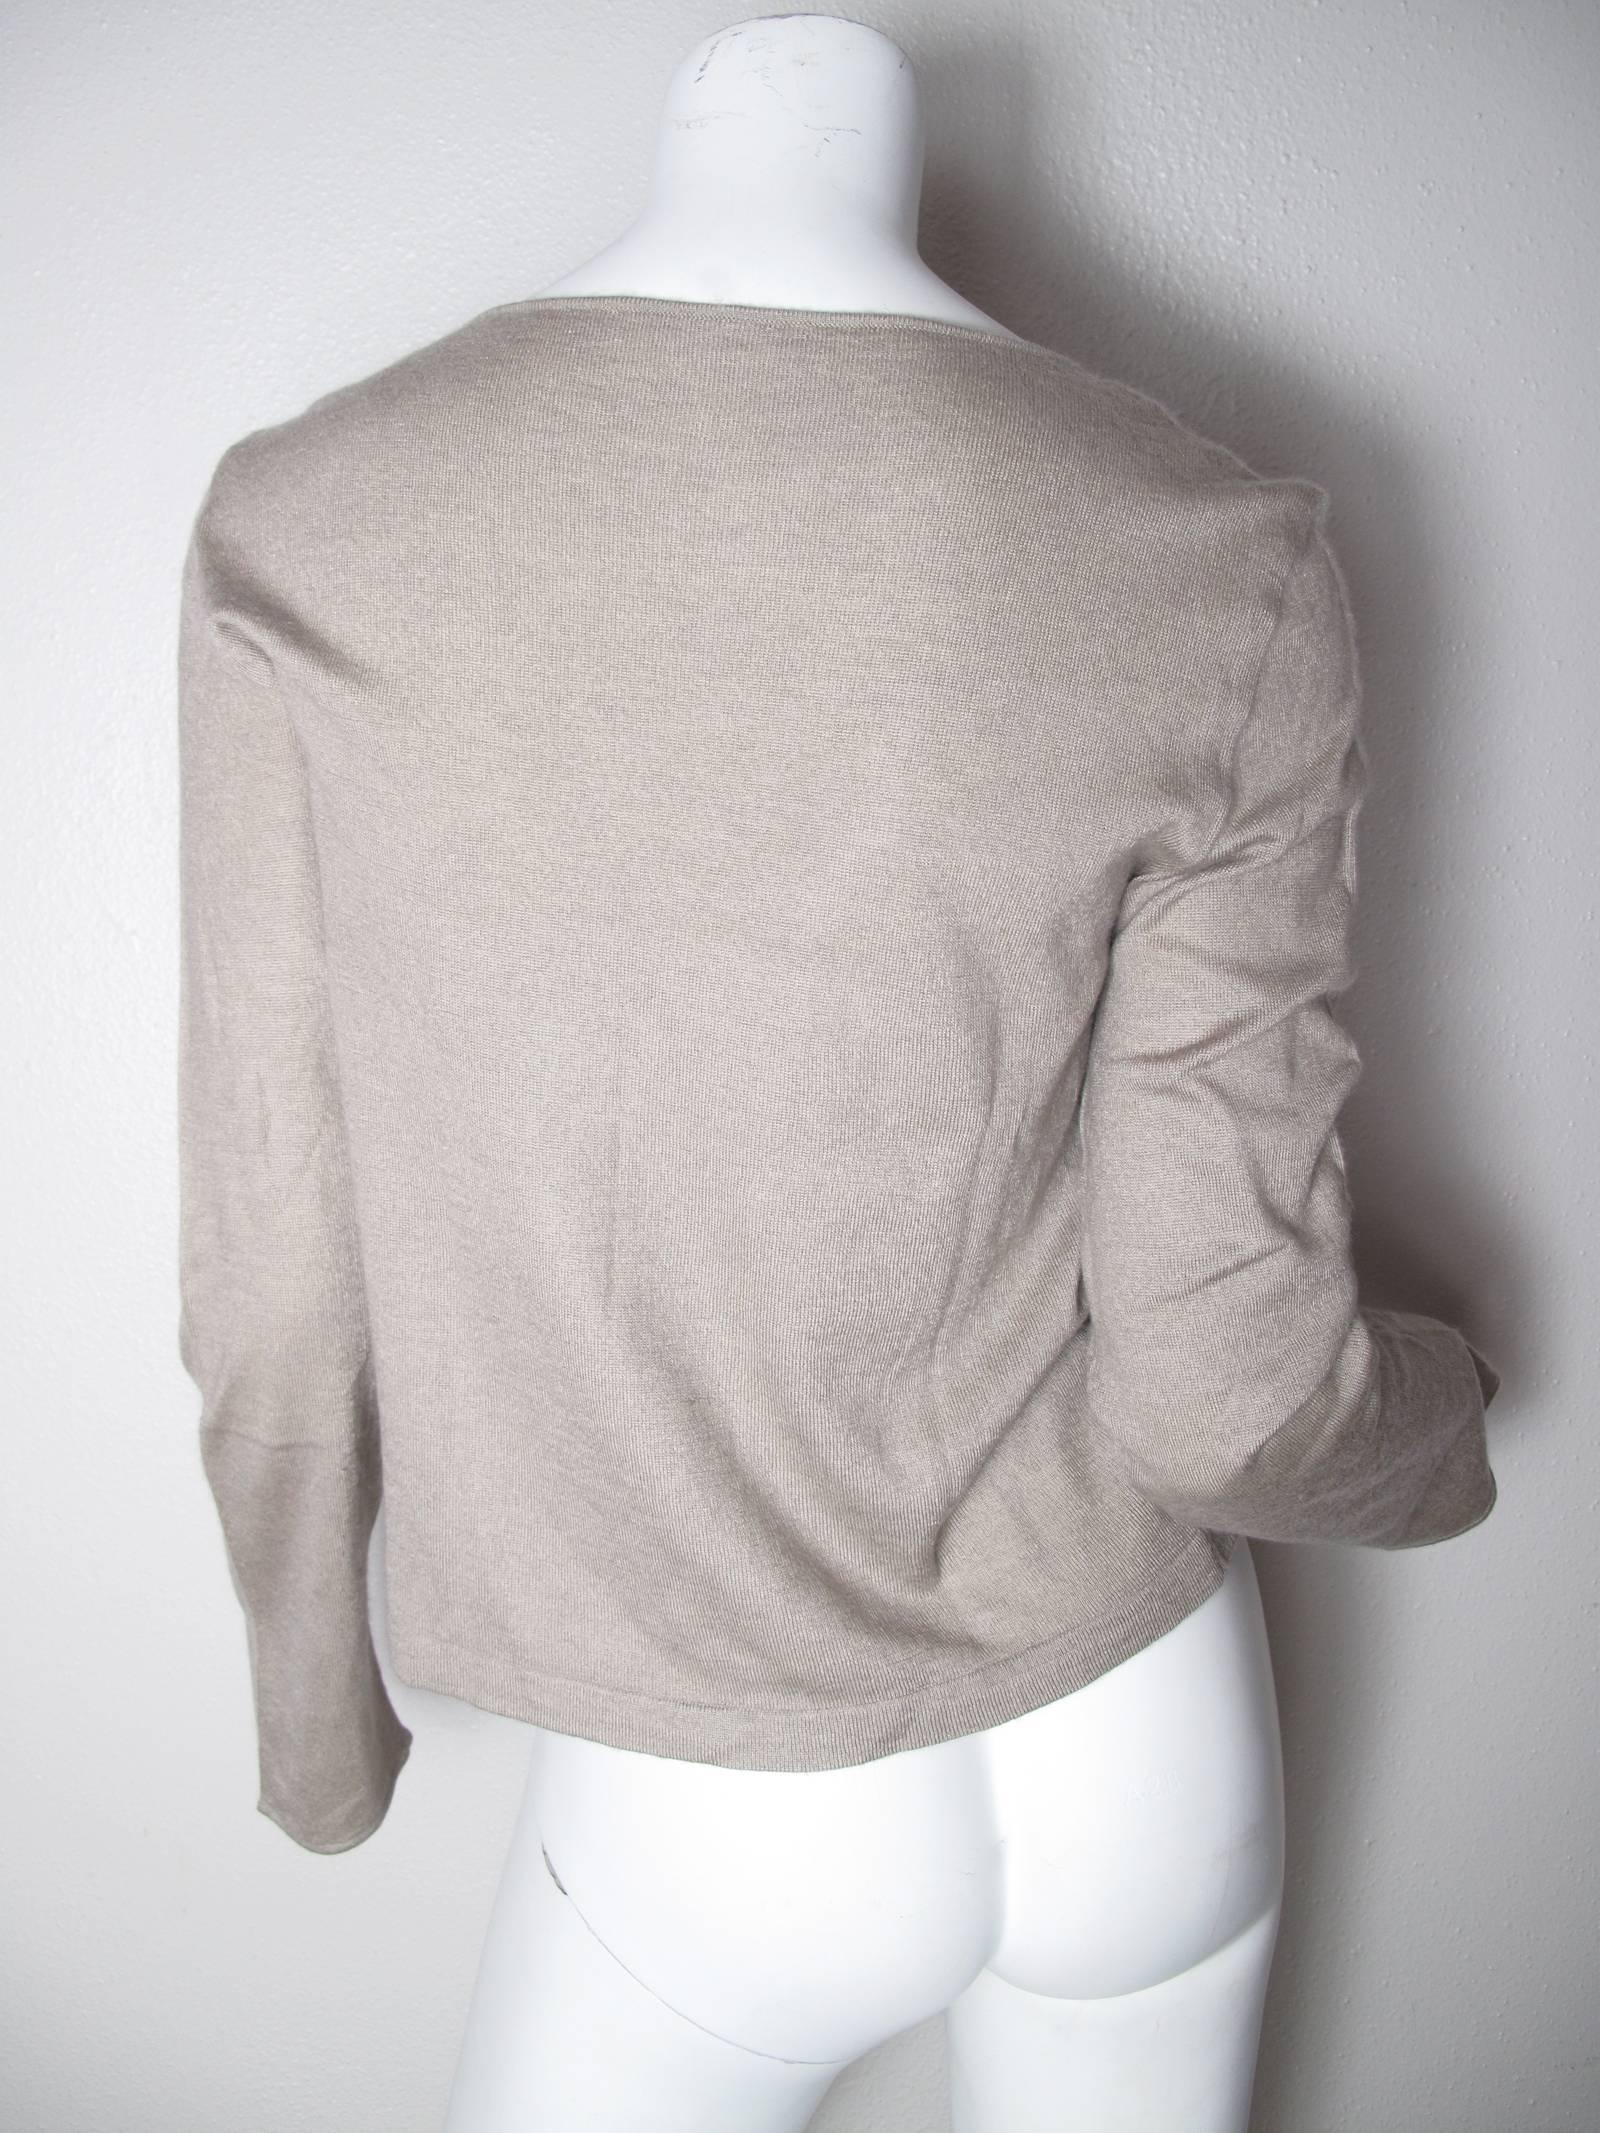 Chanel beige cashmere pull over sweater.  Chanel metal tag on front.  Condition:Very good - missing Chanel inside label.  
Size 42

